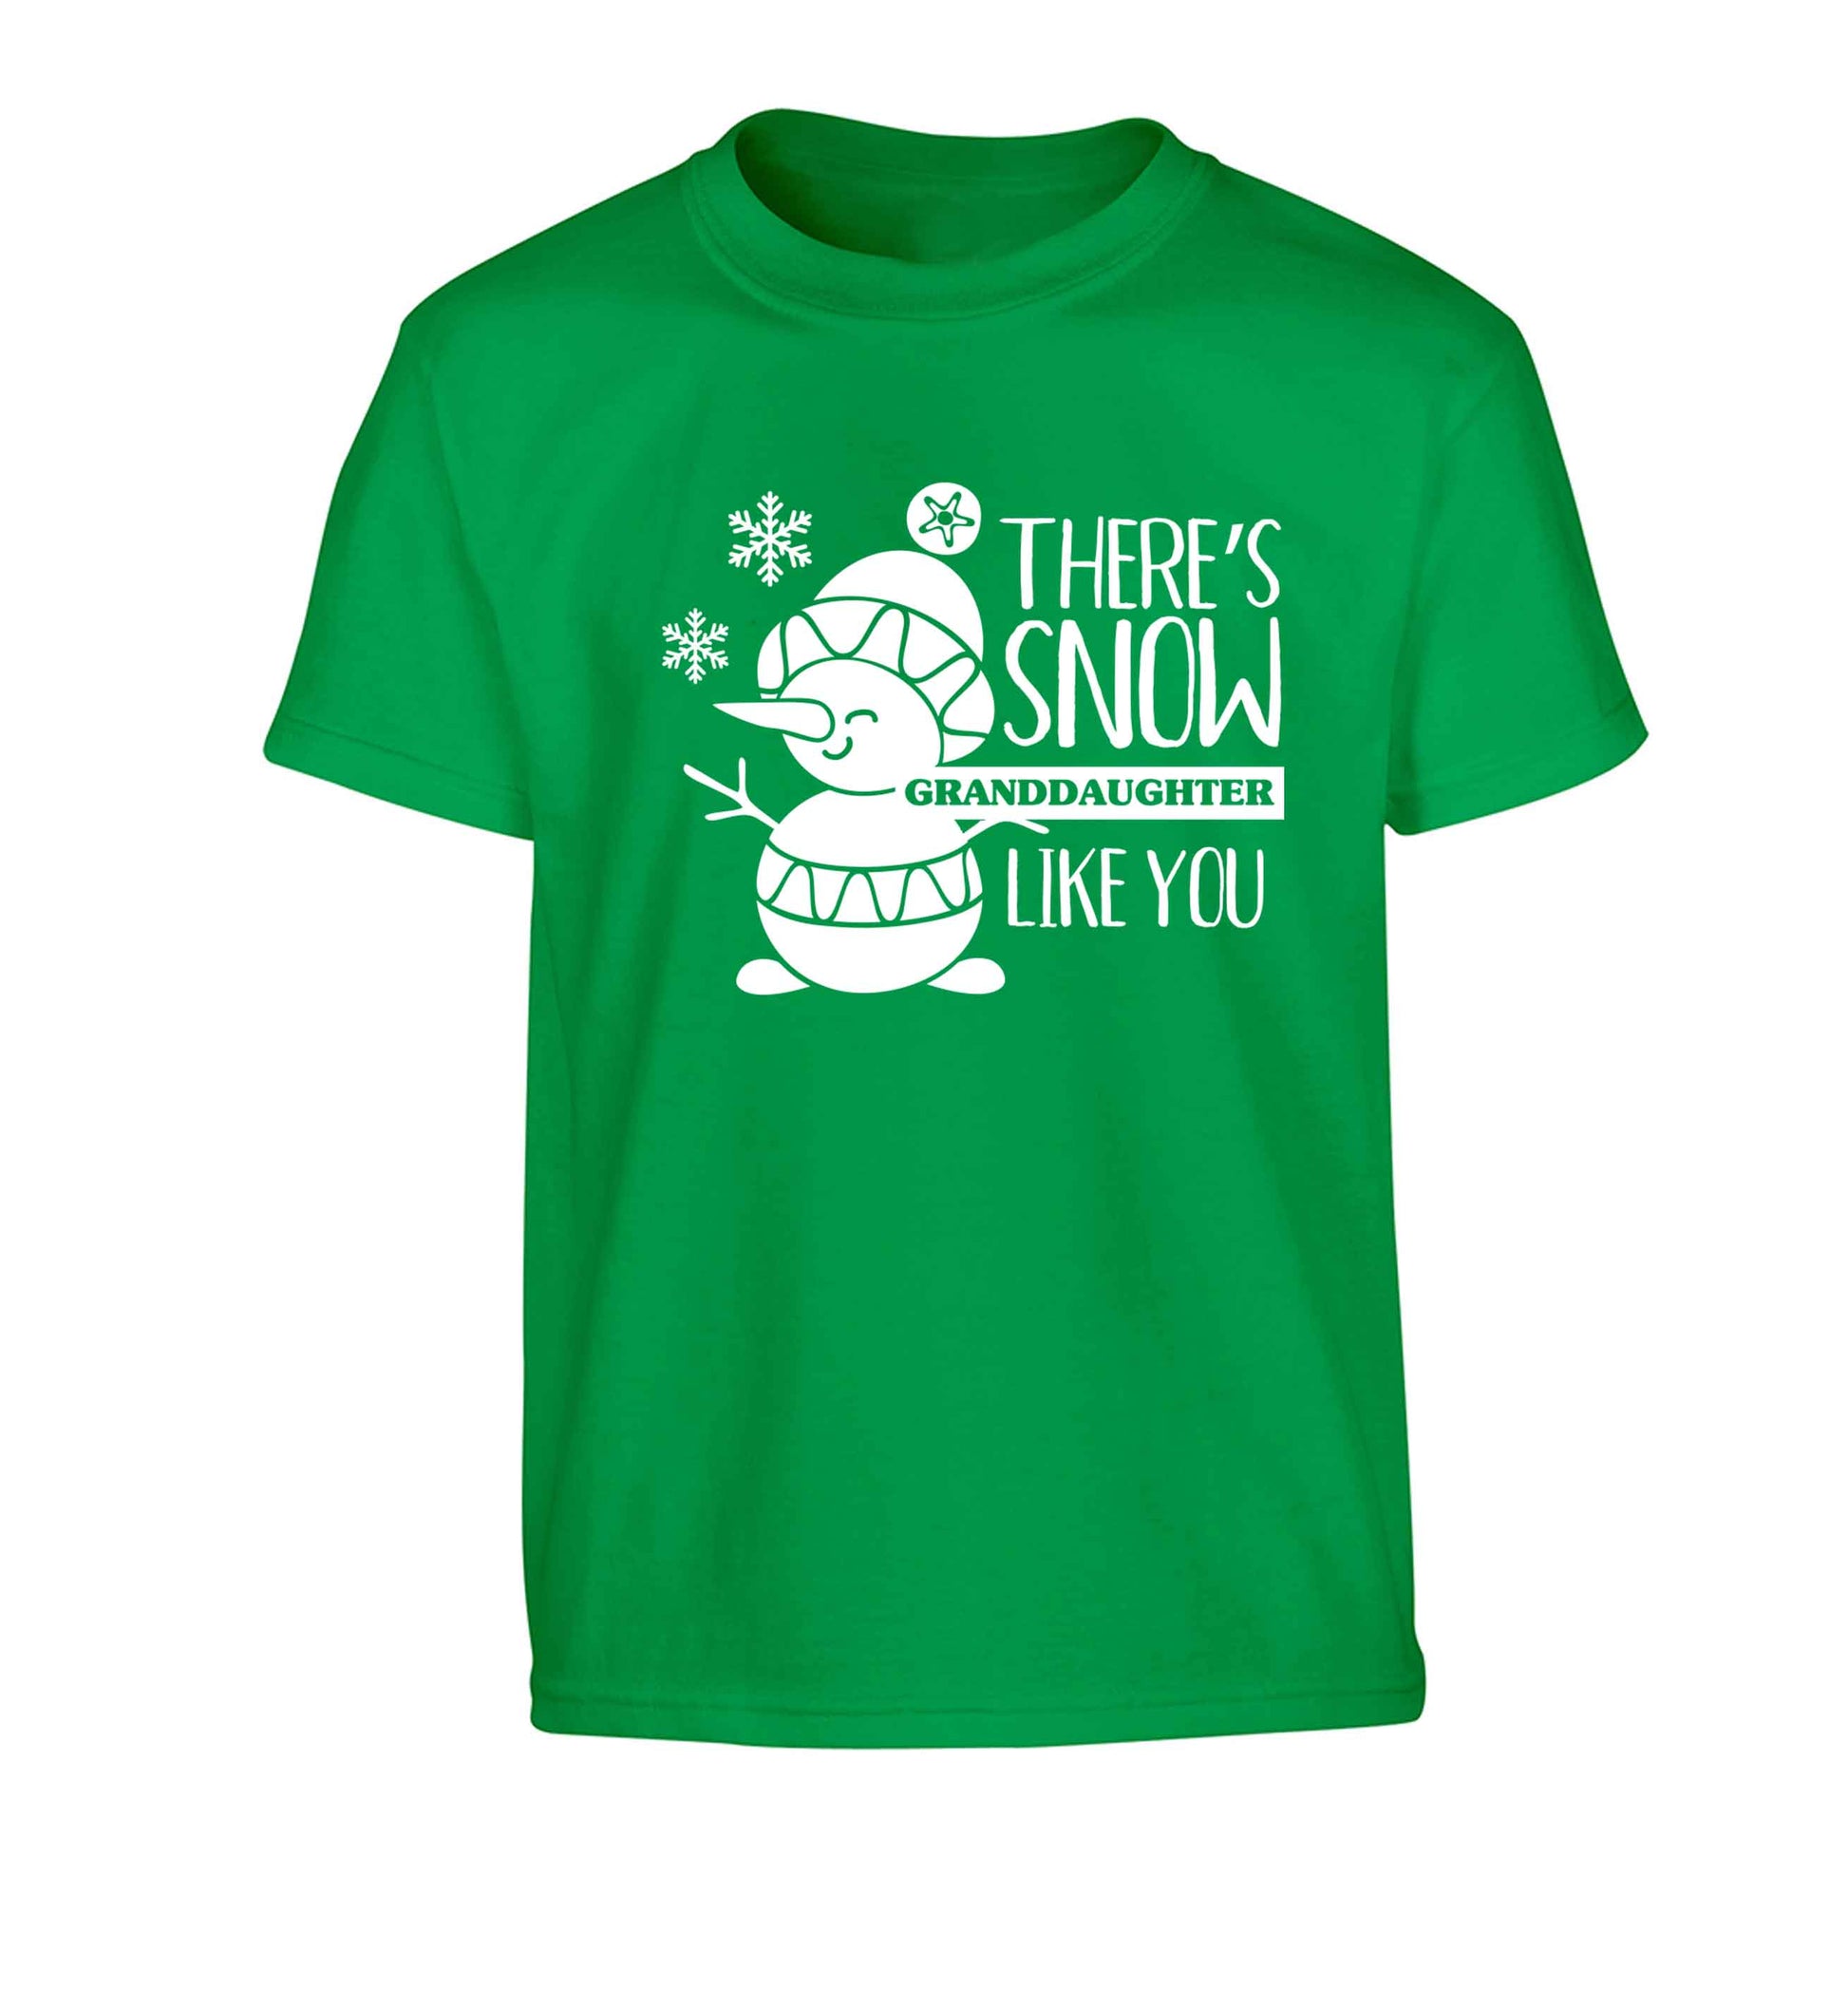 There's snow granddaughter like you Children's green Tshirt 12-13 Years